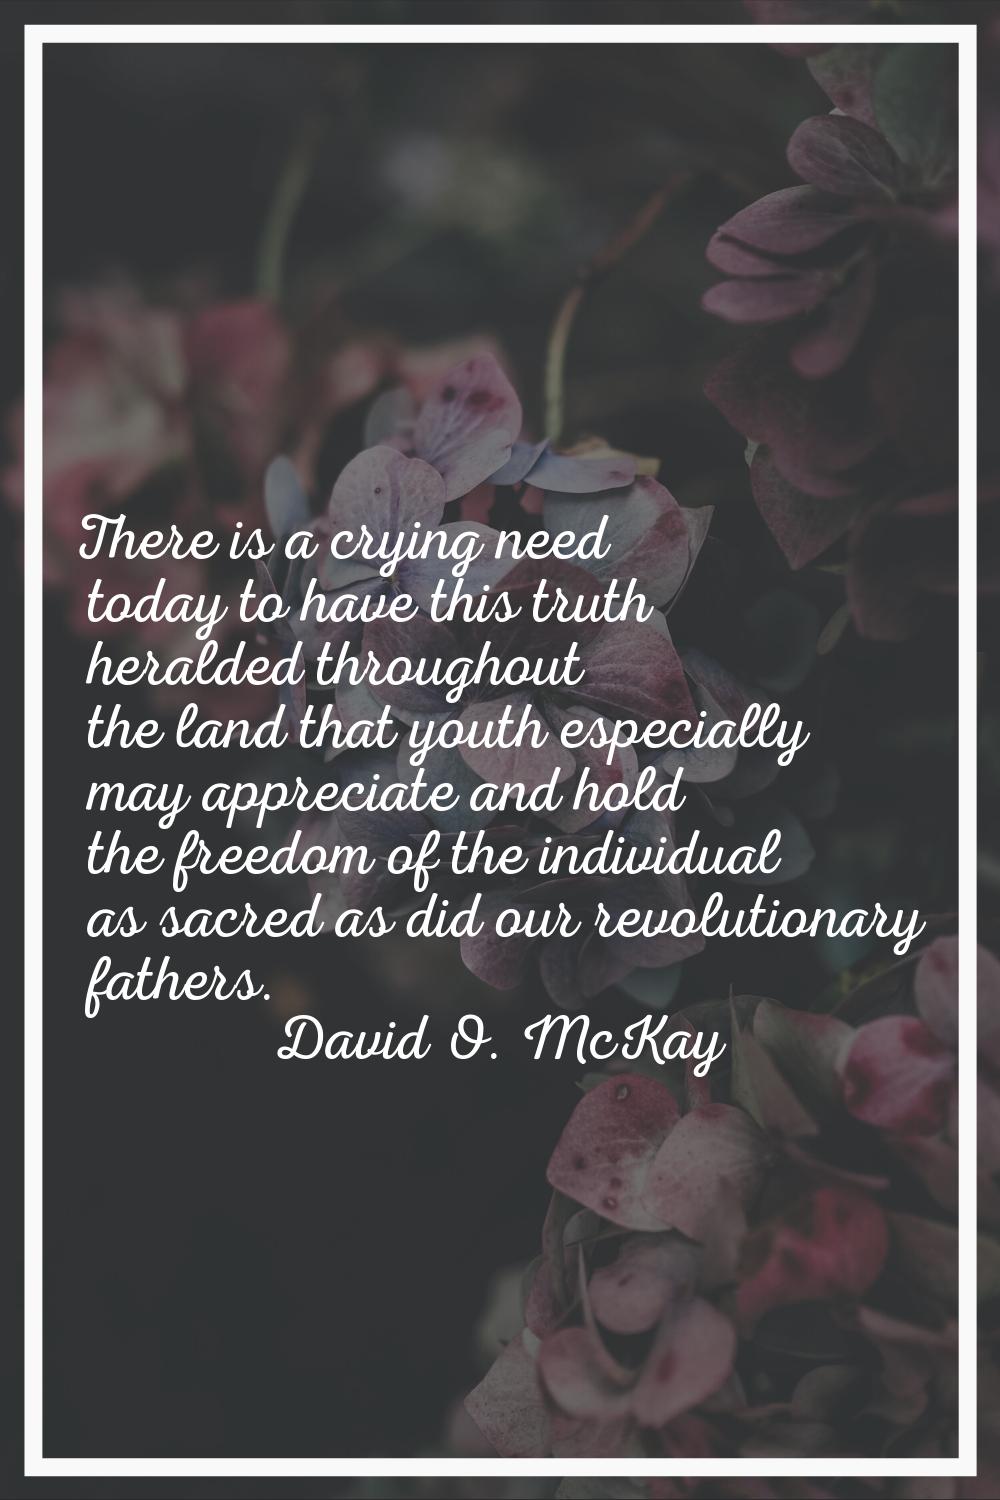 There is a crying need today to have this truth heralded throughout the land that youth especially 